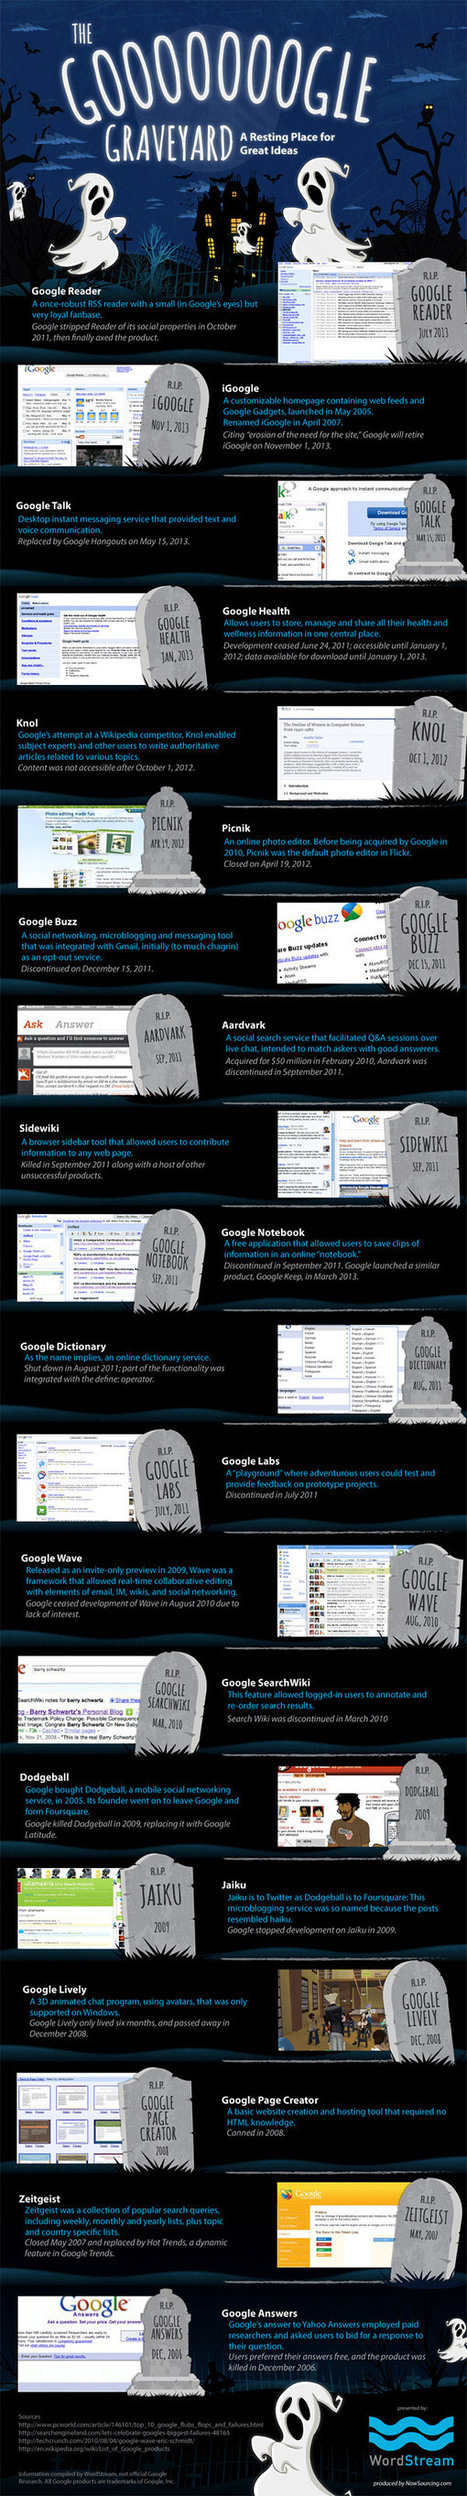 Google Graveyard [Infographic] | Strictly pedagogical | Scoop.it